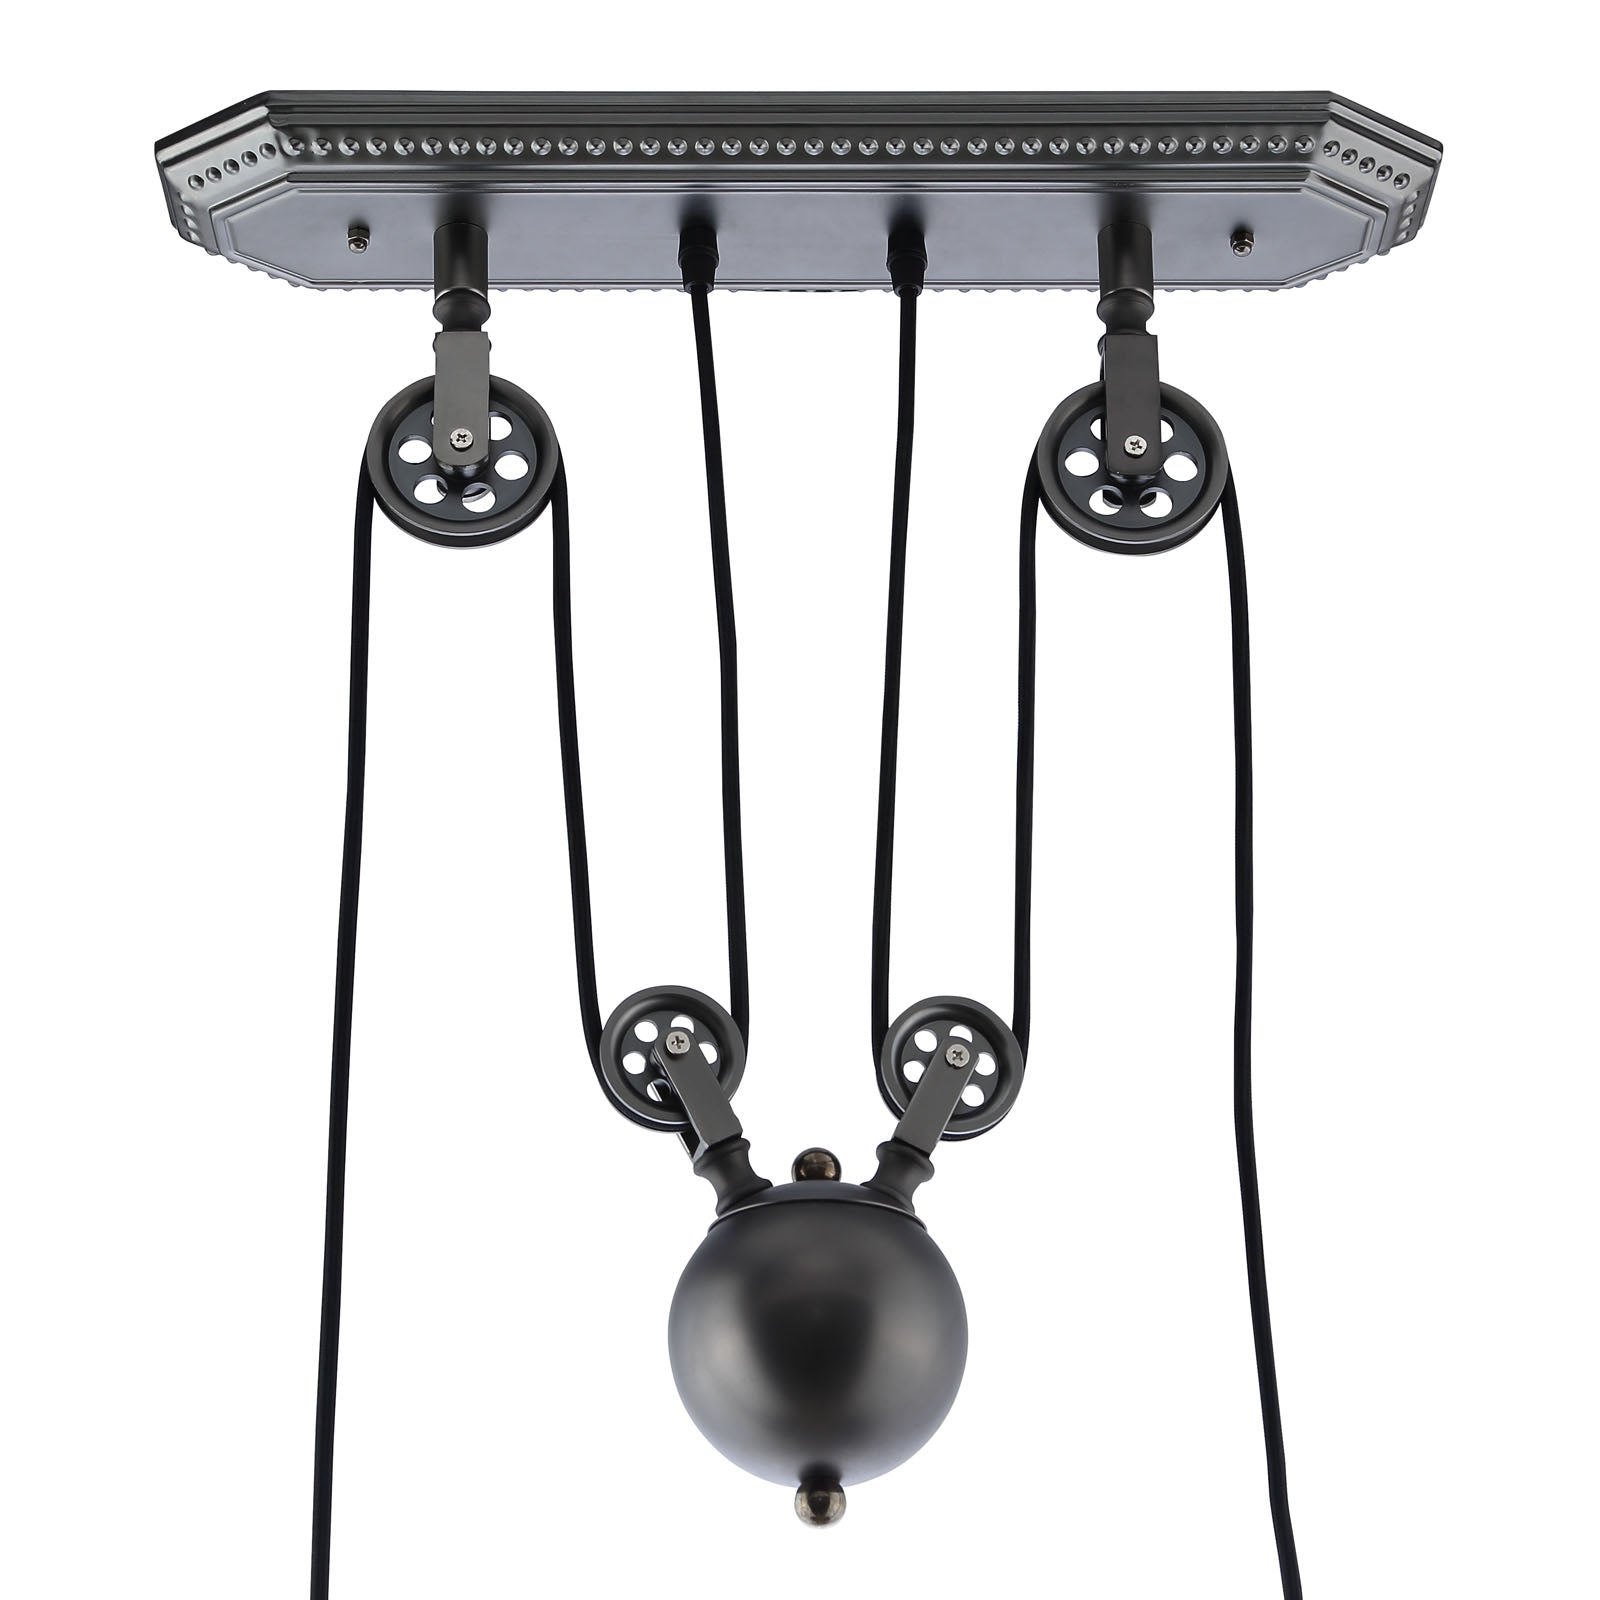 Innovateous Ceiling Fixture - East Shore Modern Home Furnishings